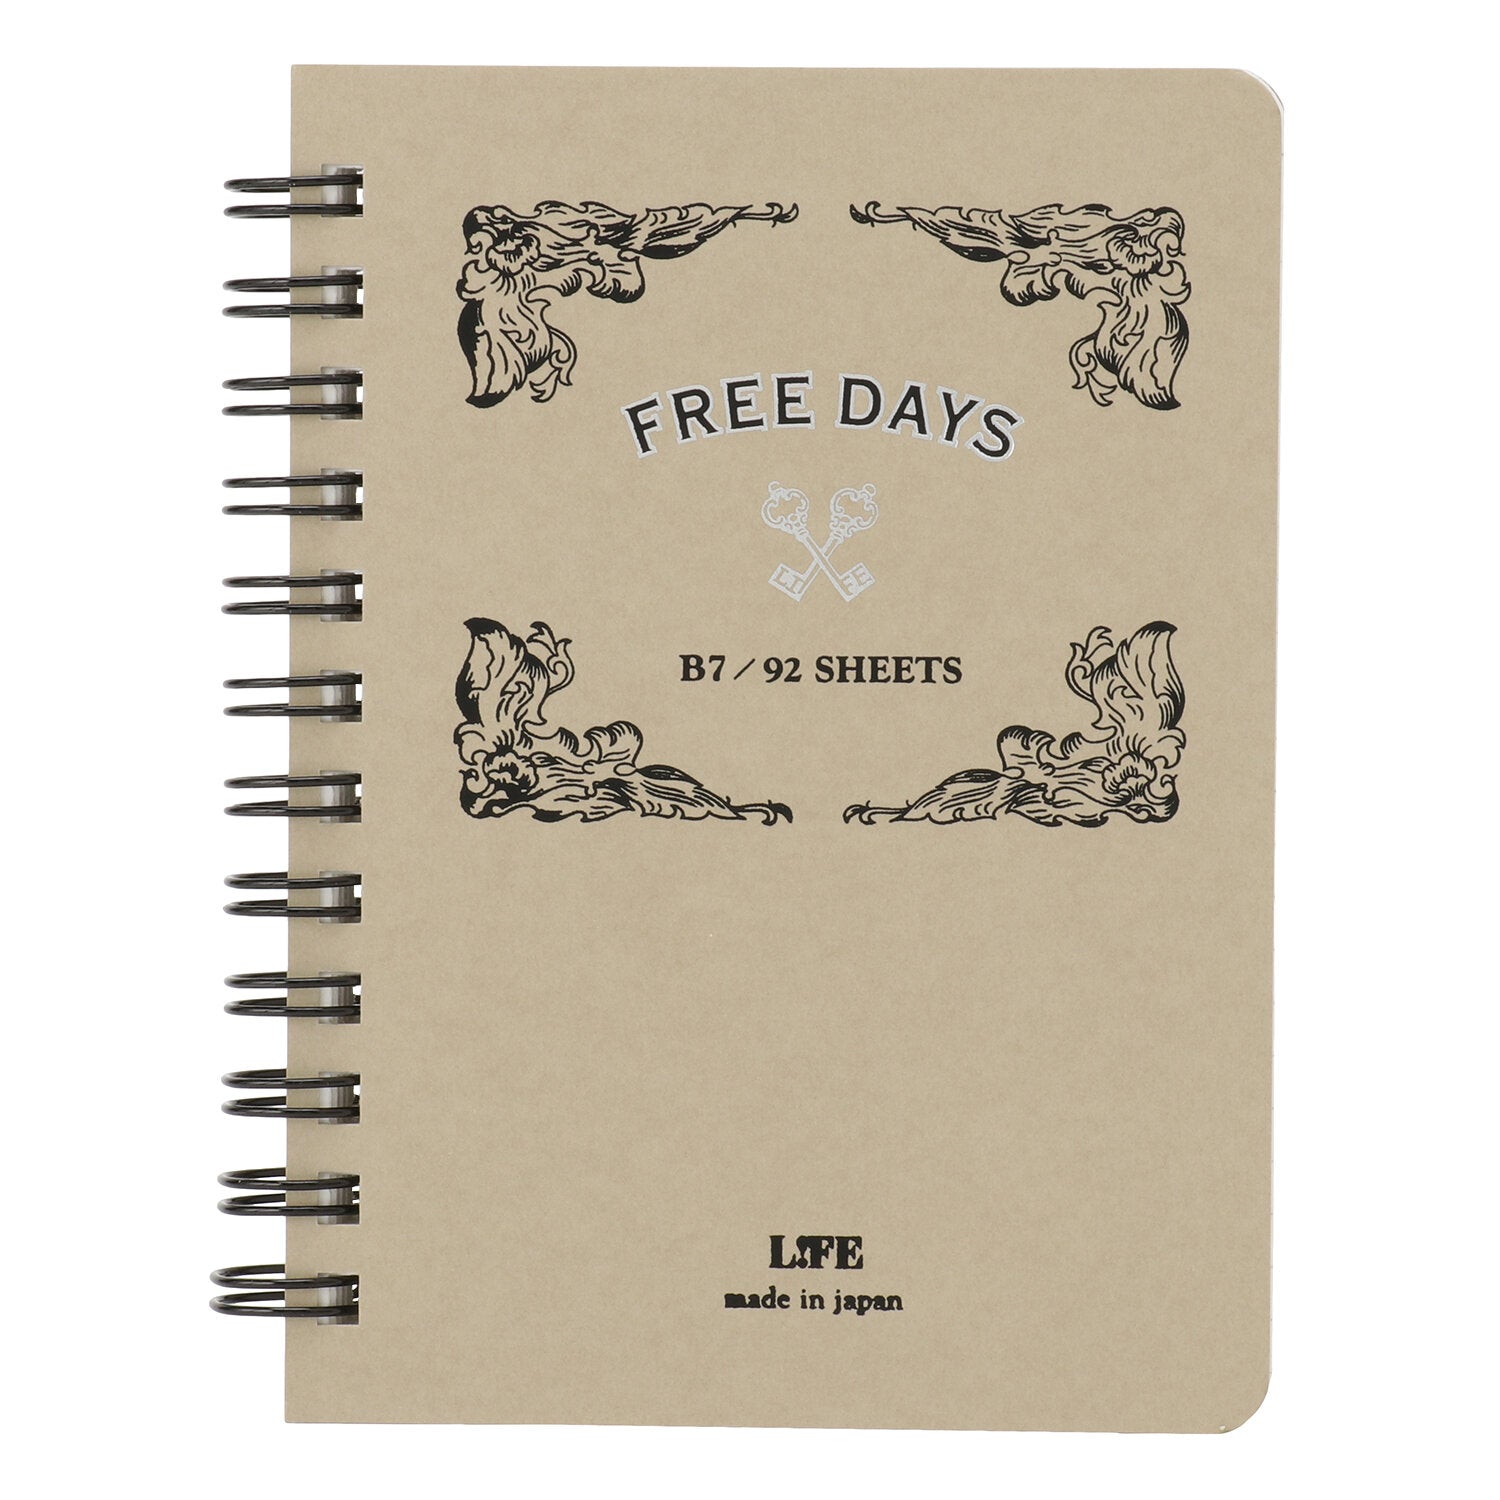 LIFE Free Days Grey x White Front cover made in japan